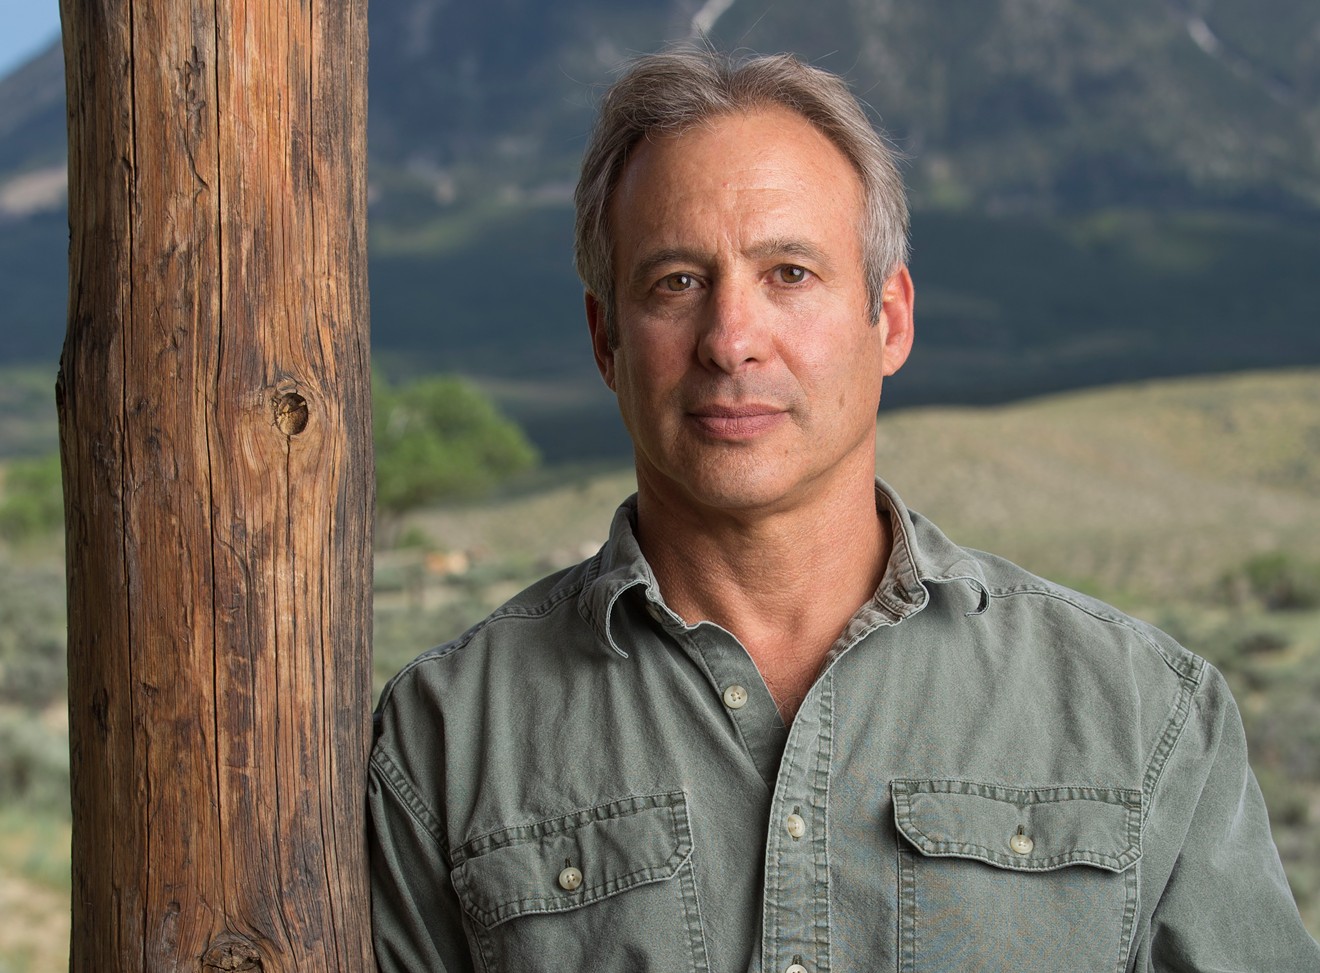 Colorado novelist Peter Heller will read from his latest, The River, at the Tattered Cover Colfax on March 11.